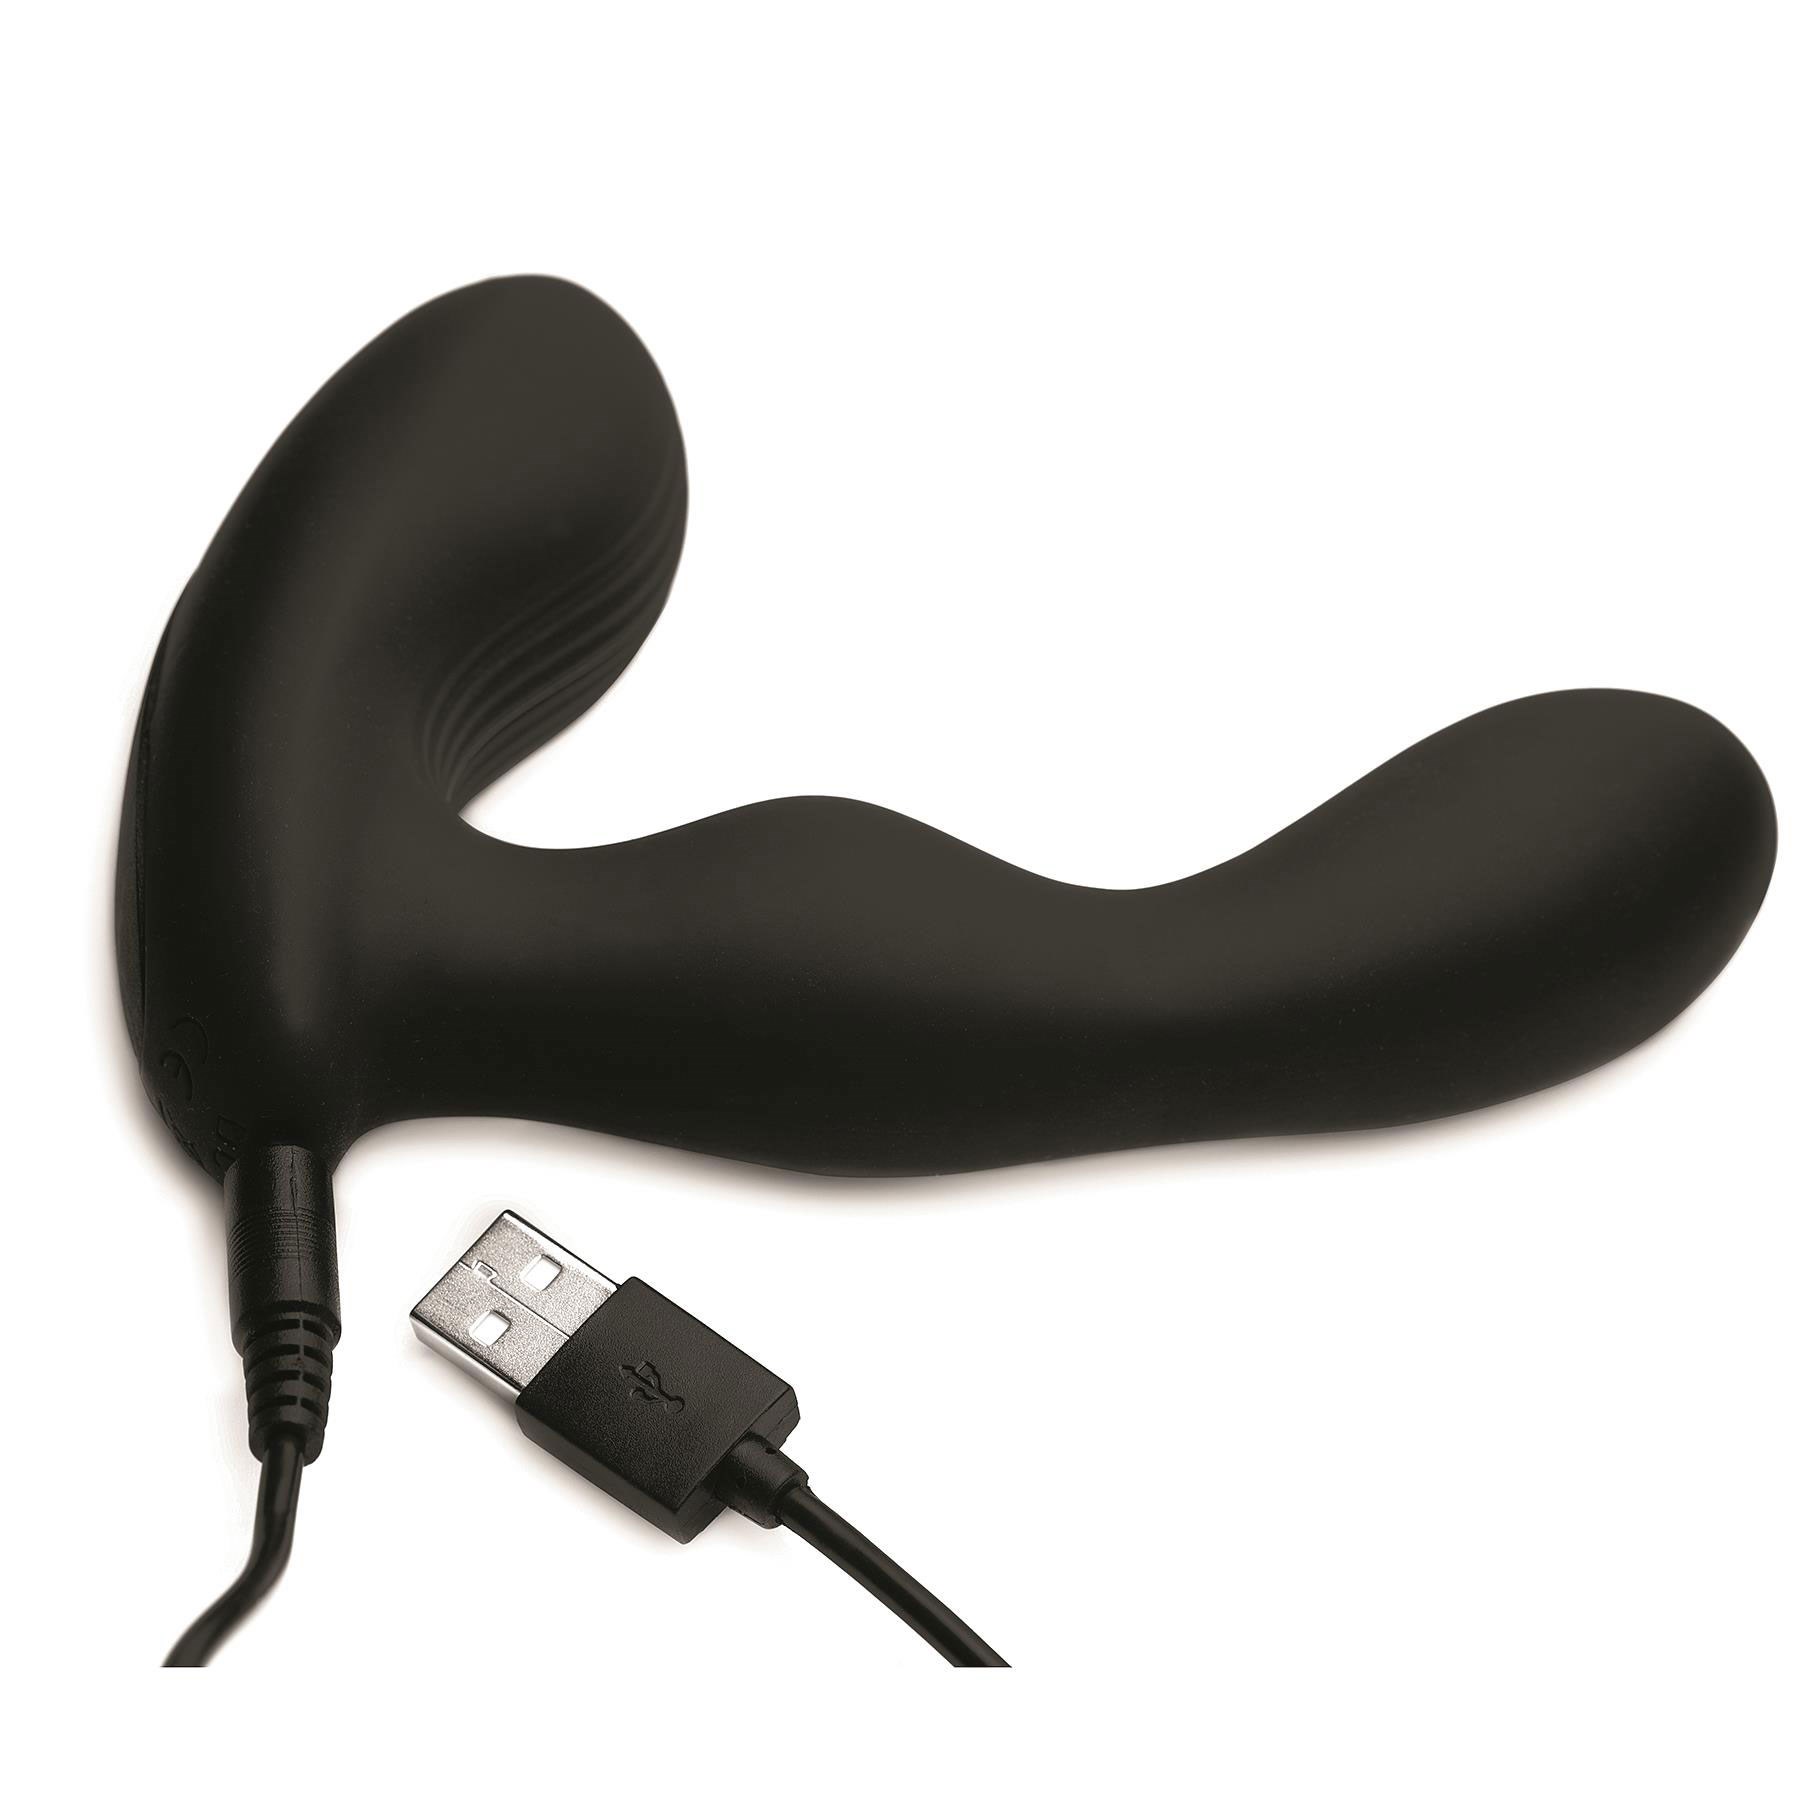 Alpha Pro 7X Prostate Massager with USB charger plugged into base of toy